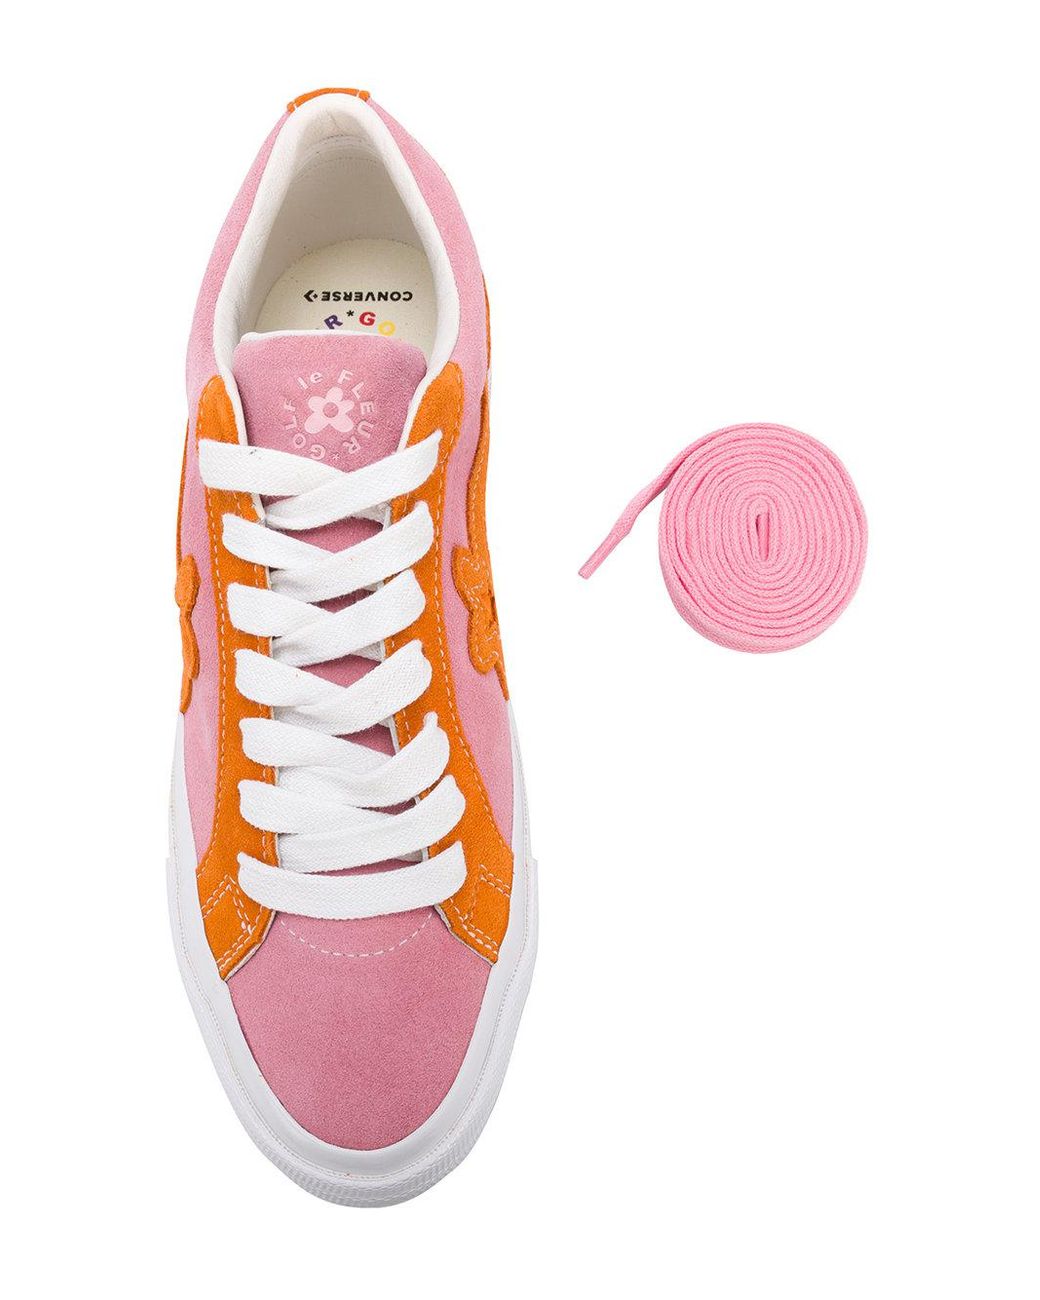 Converse Floral Embellished Sneakers in Pink | Lyst